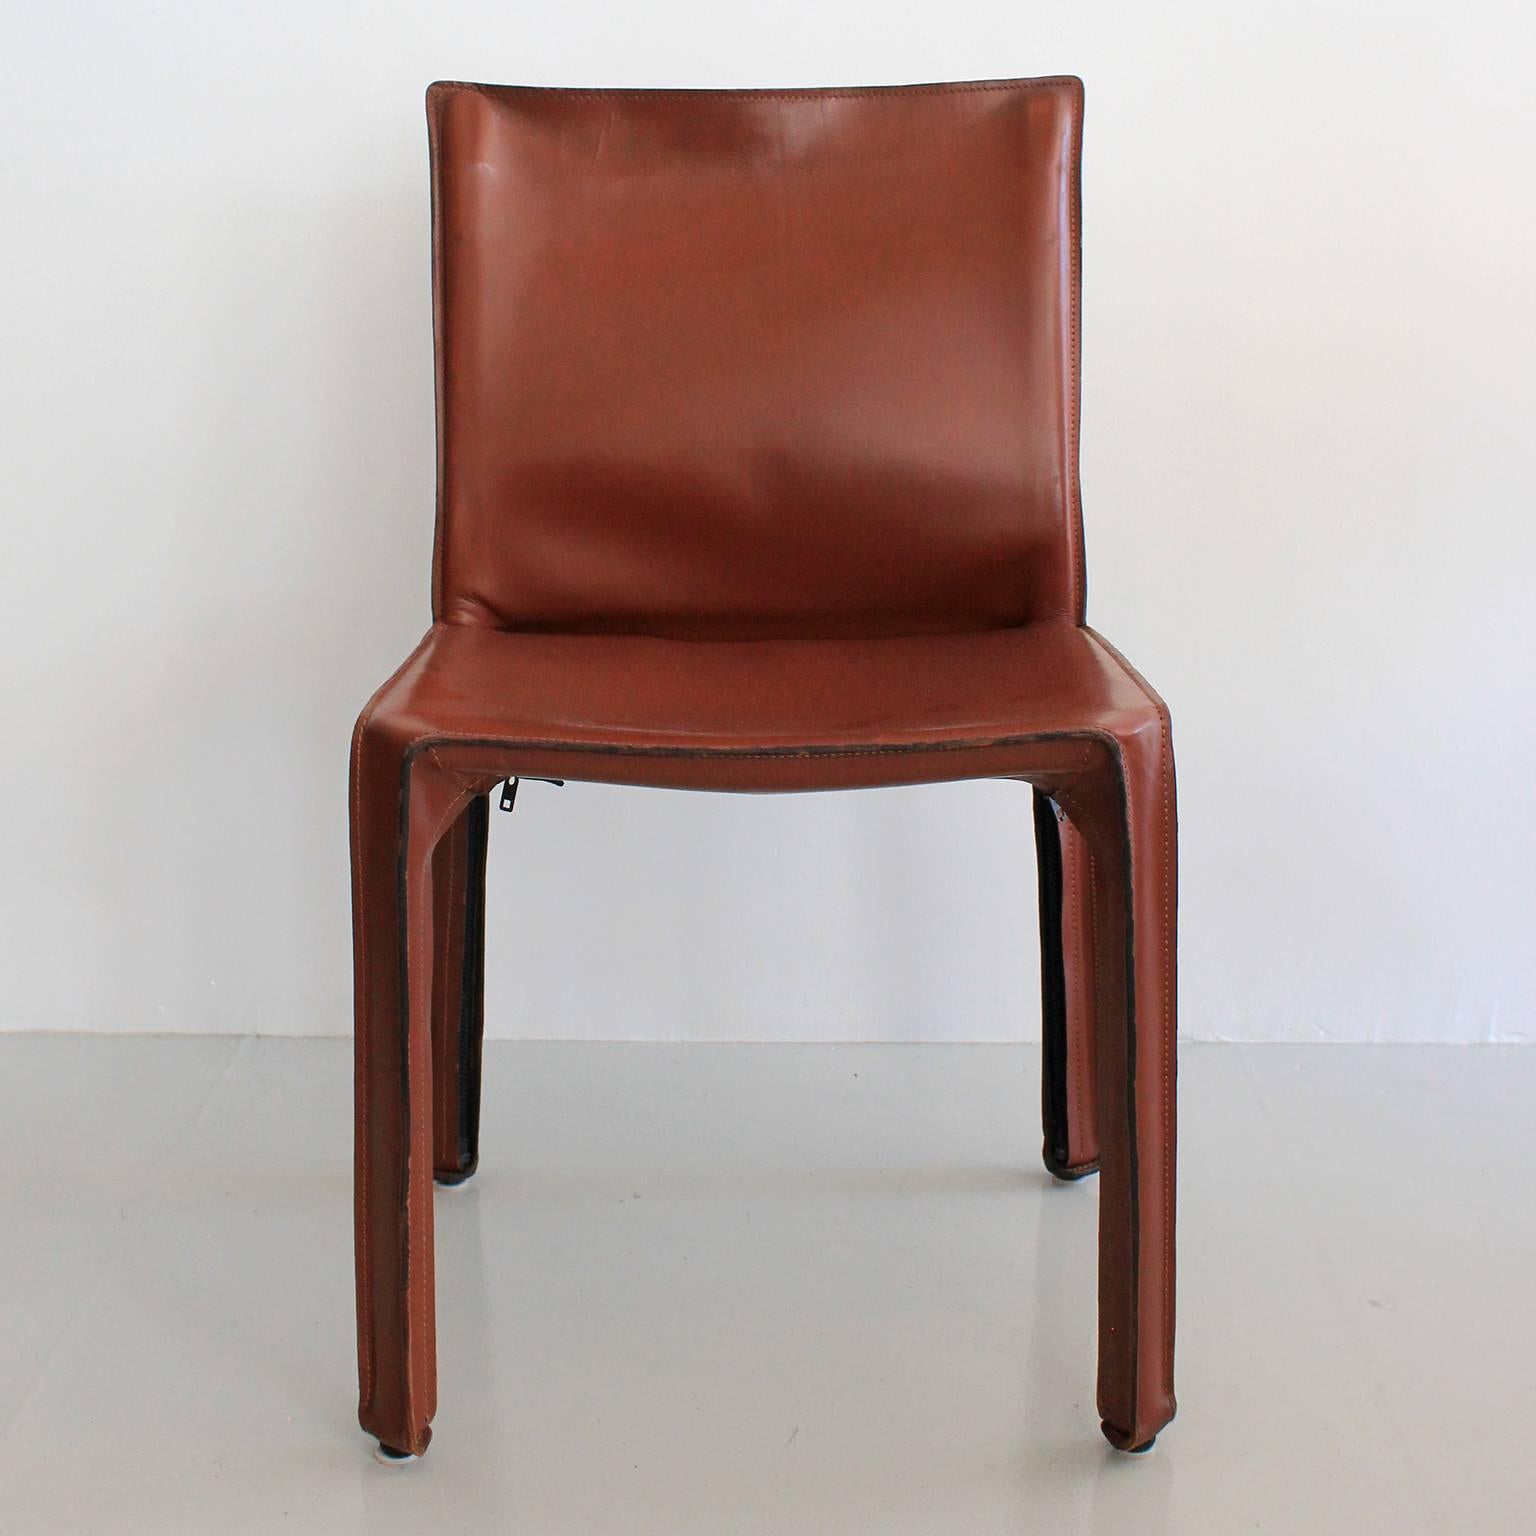 Classic saddle leather CAB chairs by Mario Bellini for Cassina. Great patina to leather. Excellent vintage condition. Set of eight (8) available.